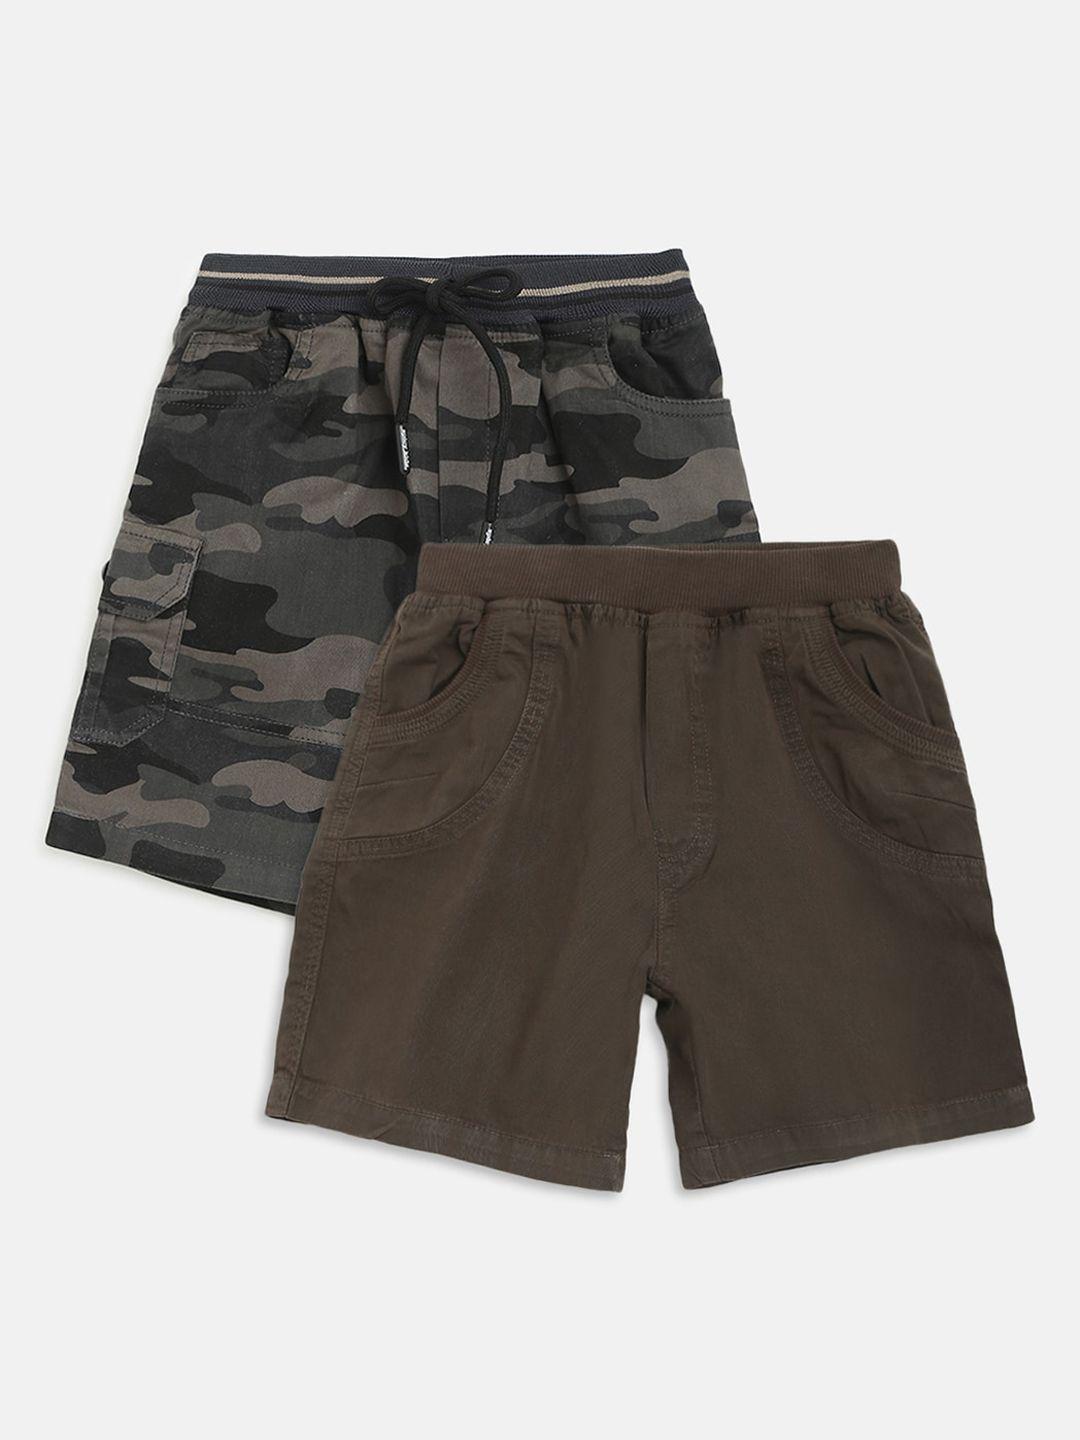 homegrown boys olive green camouflage printed outdoor shorts